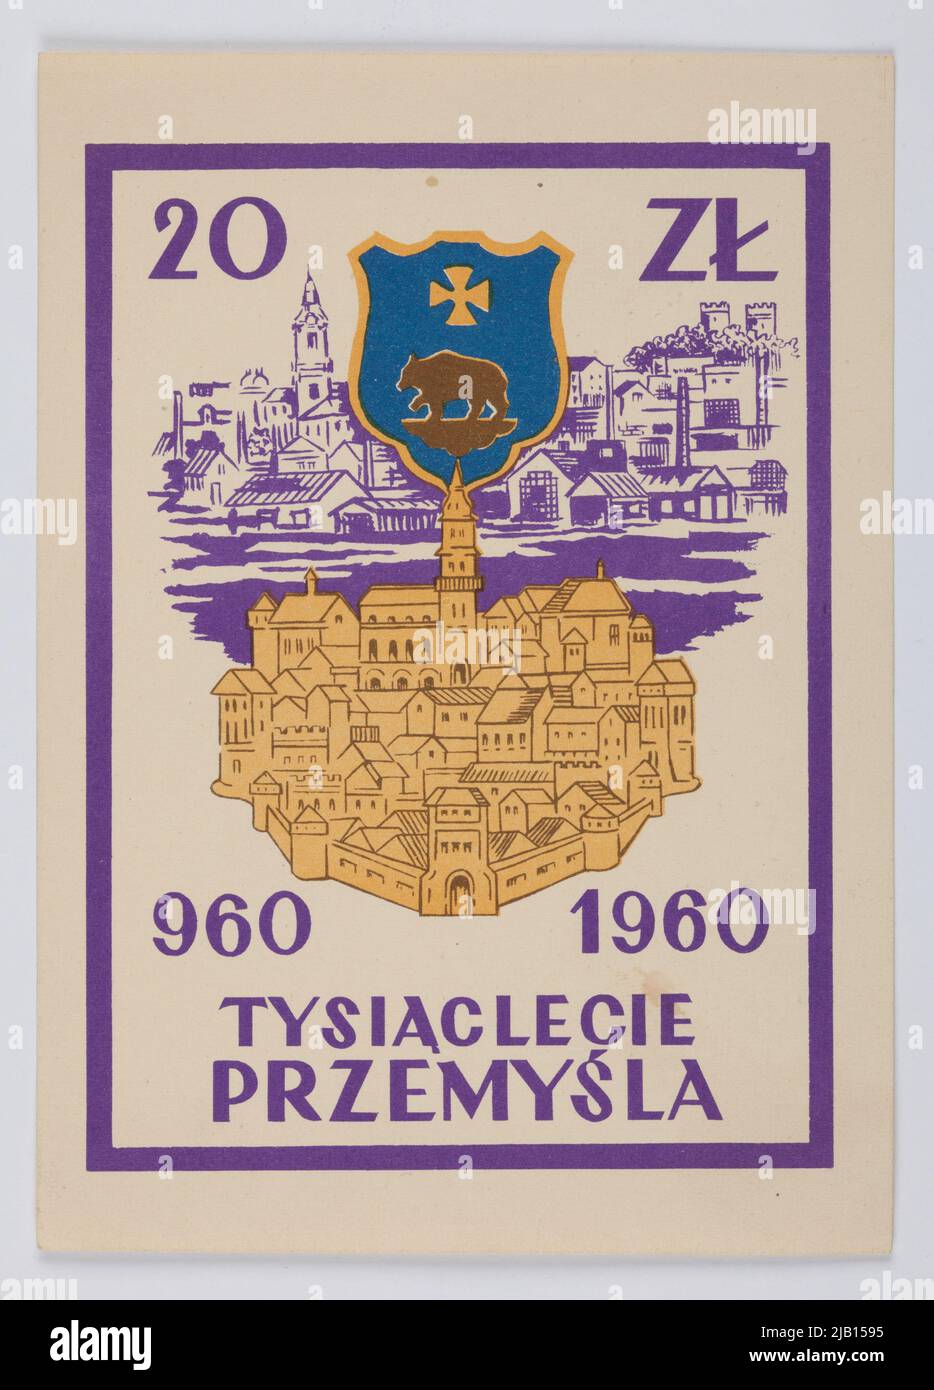 Brick for 20 zlotys for the millennium of Przemyśl, PRL, 1960 Stock Photo